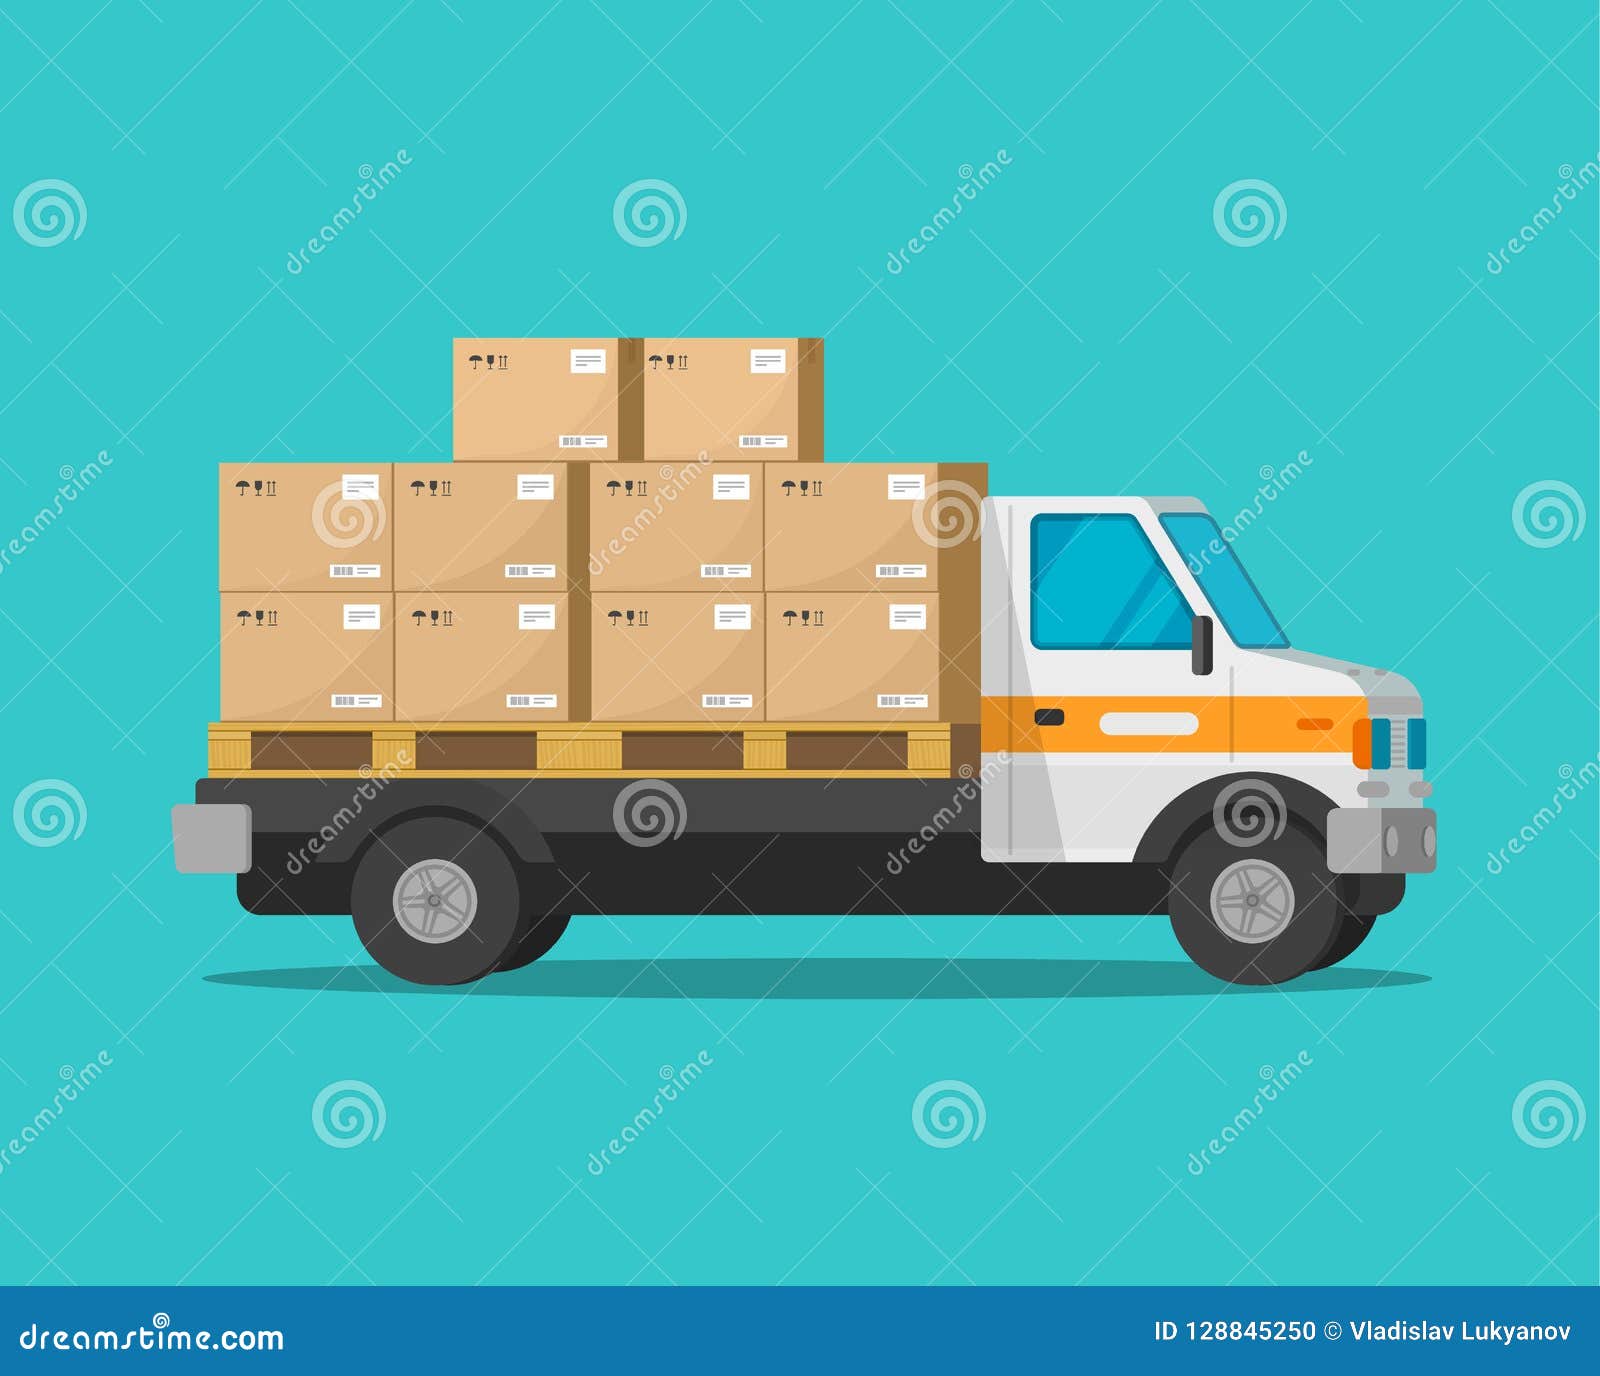 https://thumbs.dreamstime.com/z/delivery-truck-parcel-cargo-boxes-vector-illustration-flat-cartoon-freight-van-lorry-automobile-packages-isolated-128845250.jpg